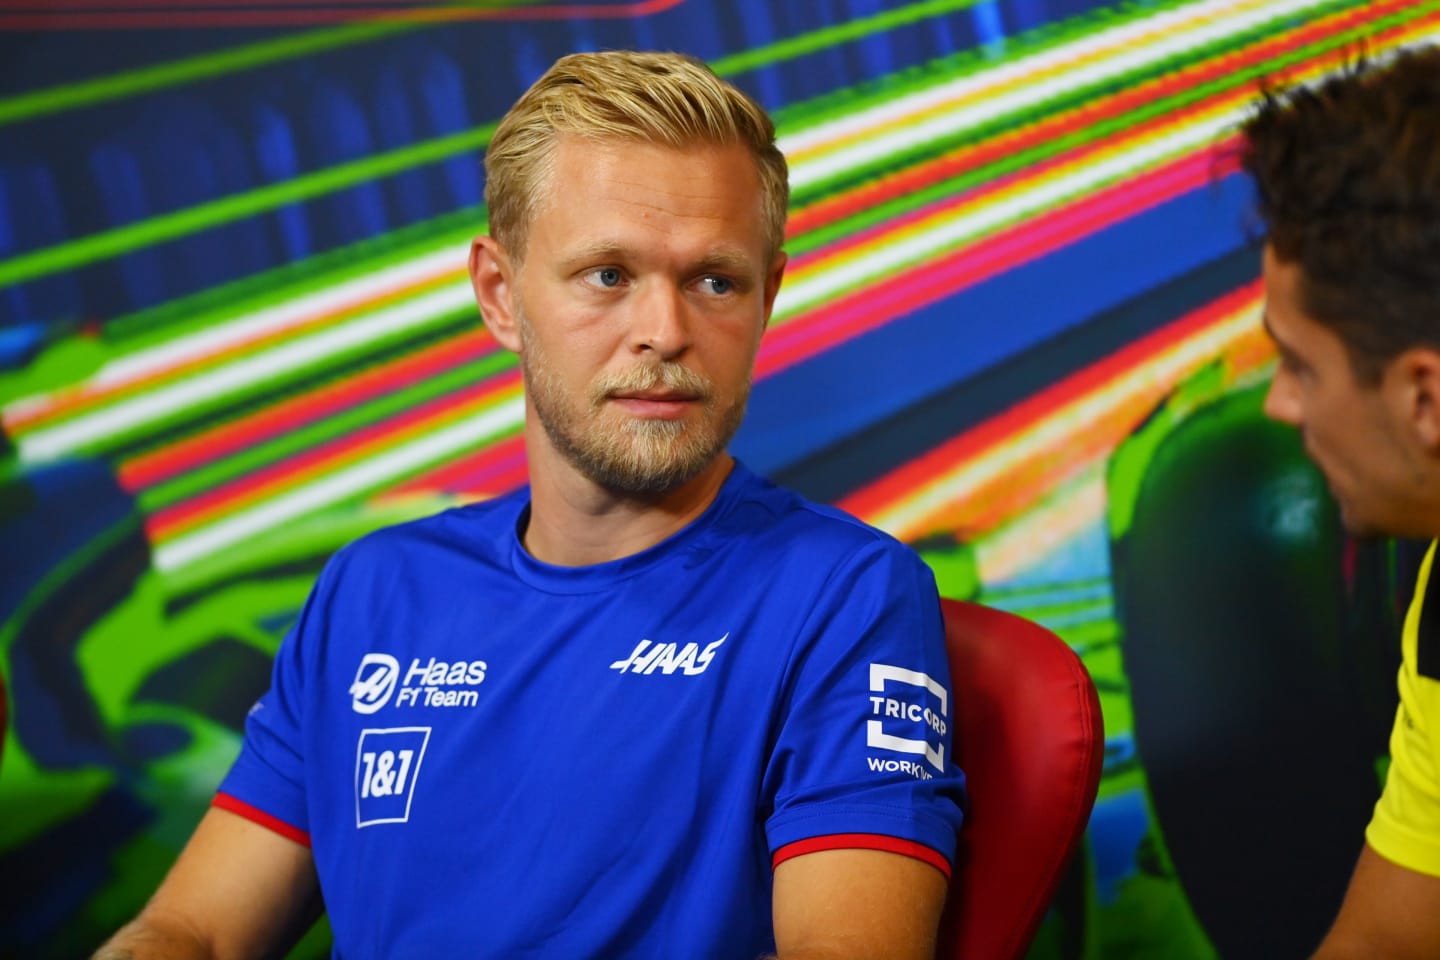 MONZA, ITALY - SEPTEMBER 08: Kevin Magnussen of Denmark and Haas F1 attends the drivers press conference during previews ahead of the F1 Grand Prix of Italy at Autodromo Nazionale Monza on September 08, 2022 in Monza, Italy. (Photo by Dan Mullan/Getty Images)